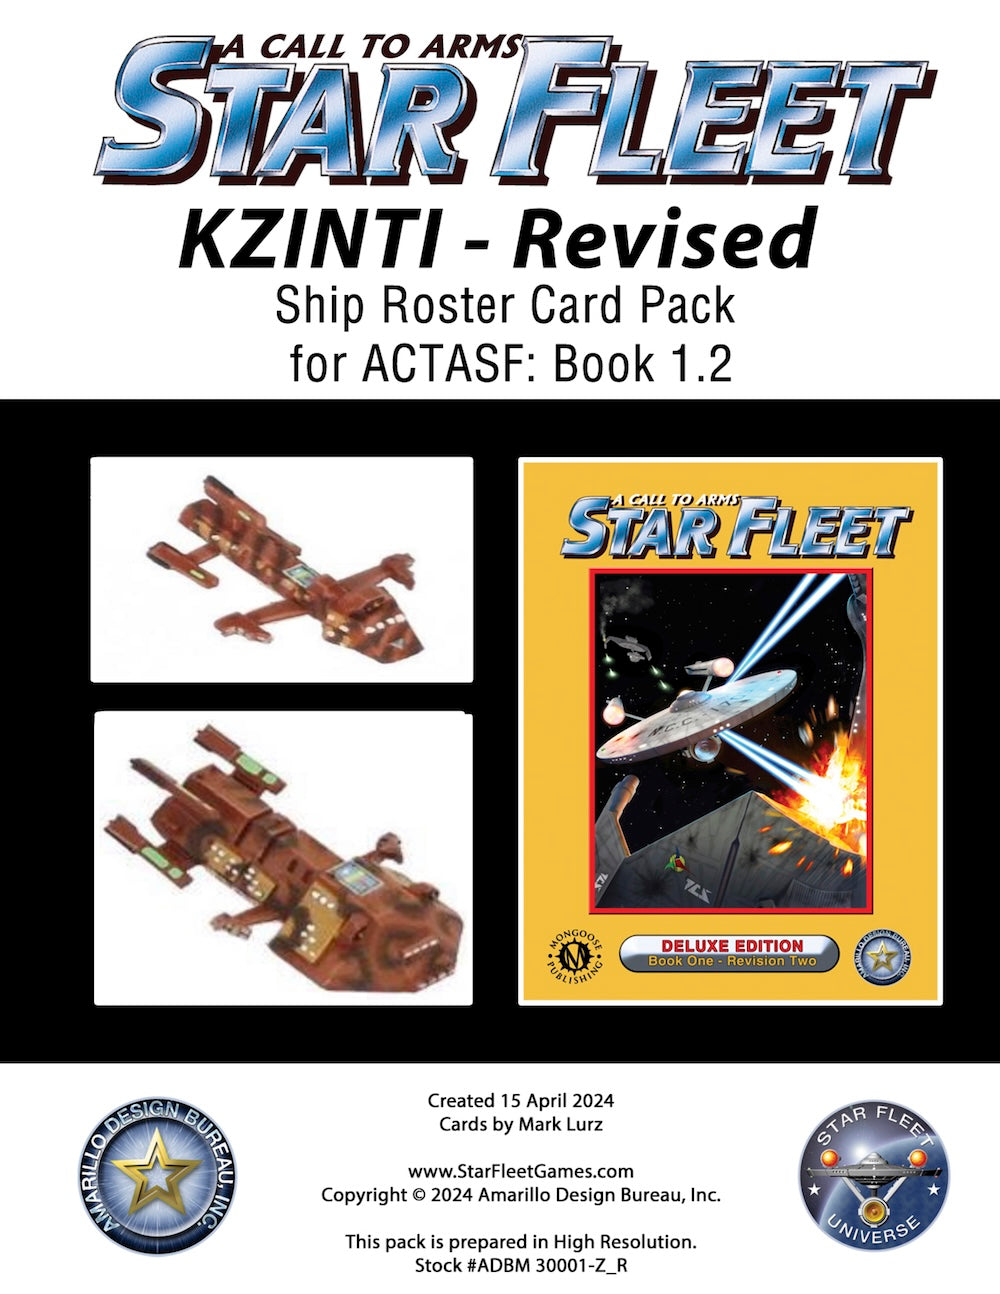 A Call to Arms: Star Fleet, Book 1.2: Kzinti Ship Roster Card Pack Revised